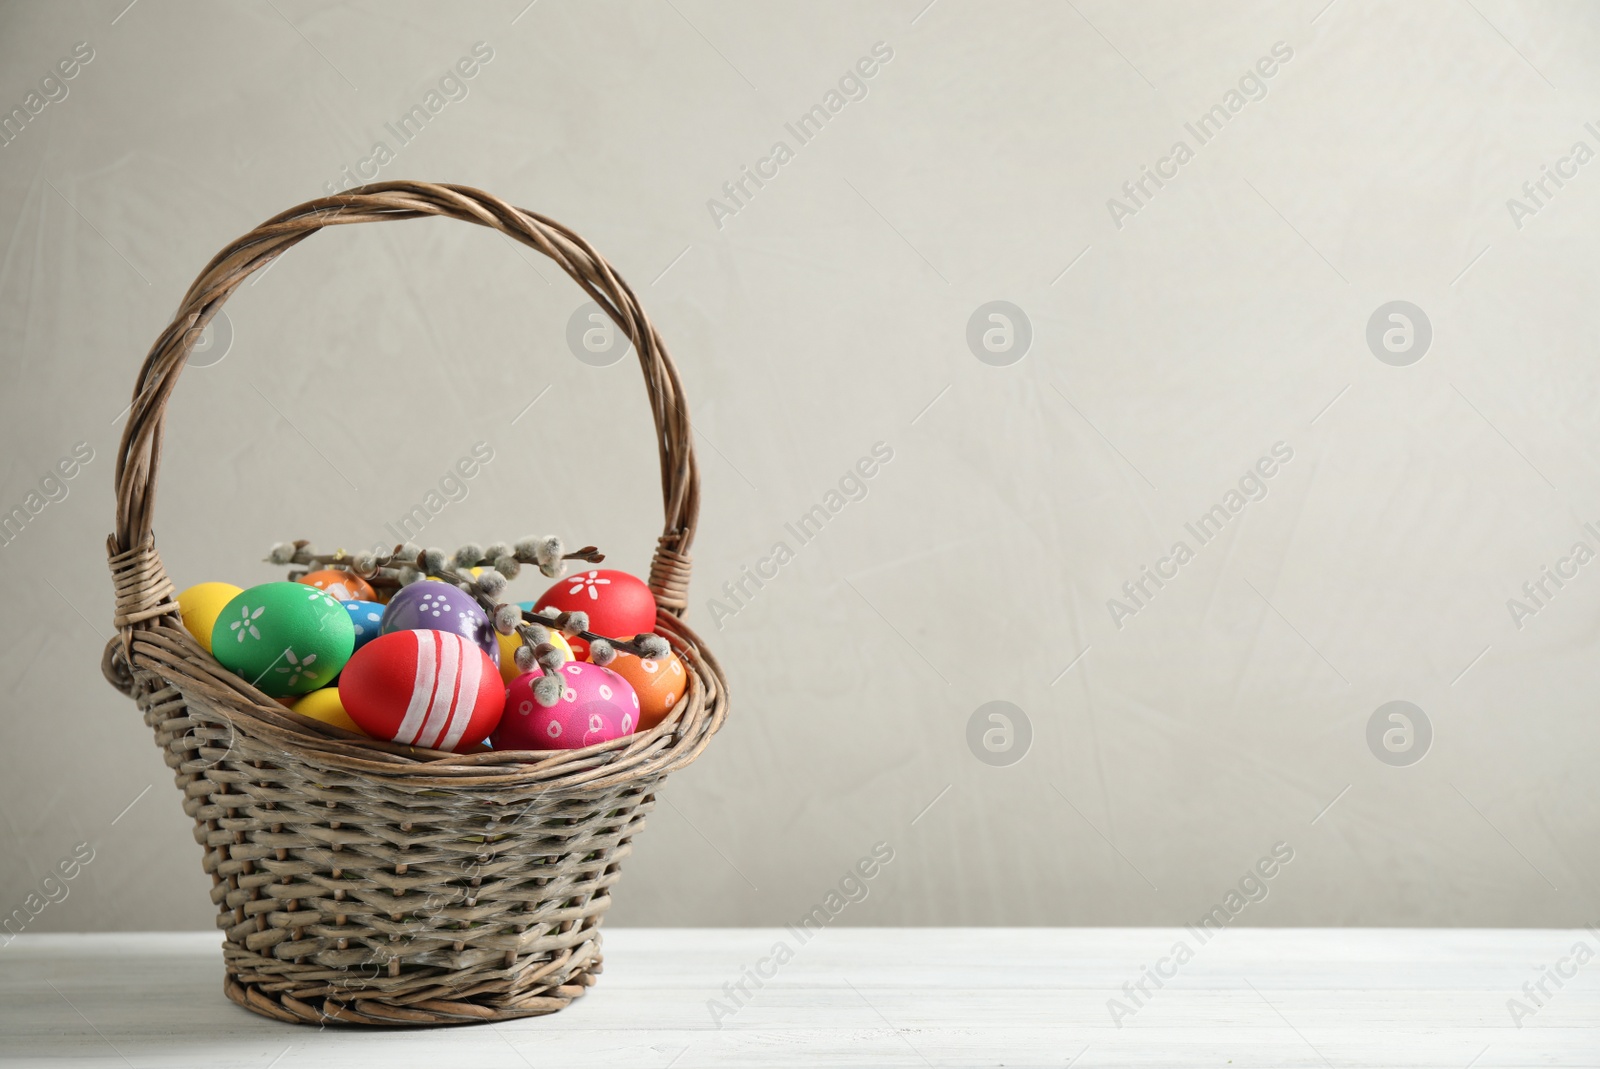 Photo of Colorful Easter eggs in wicker basket on white wooden table against grey background